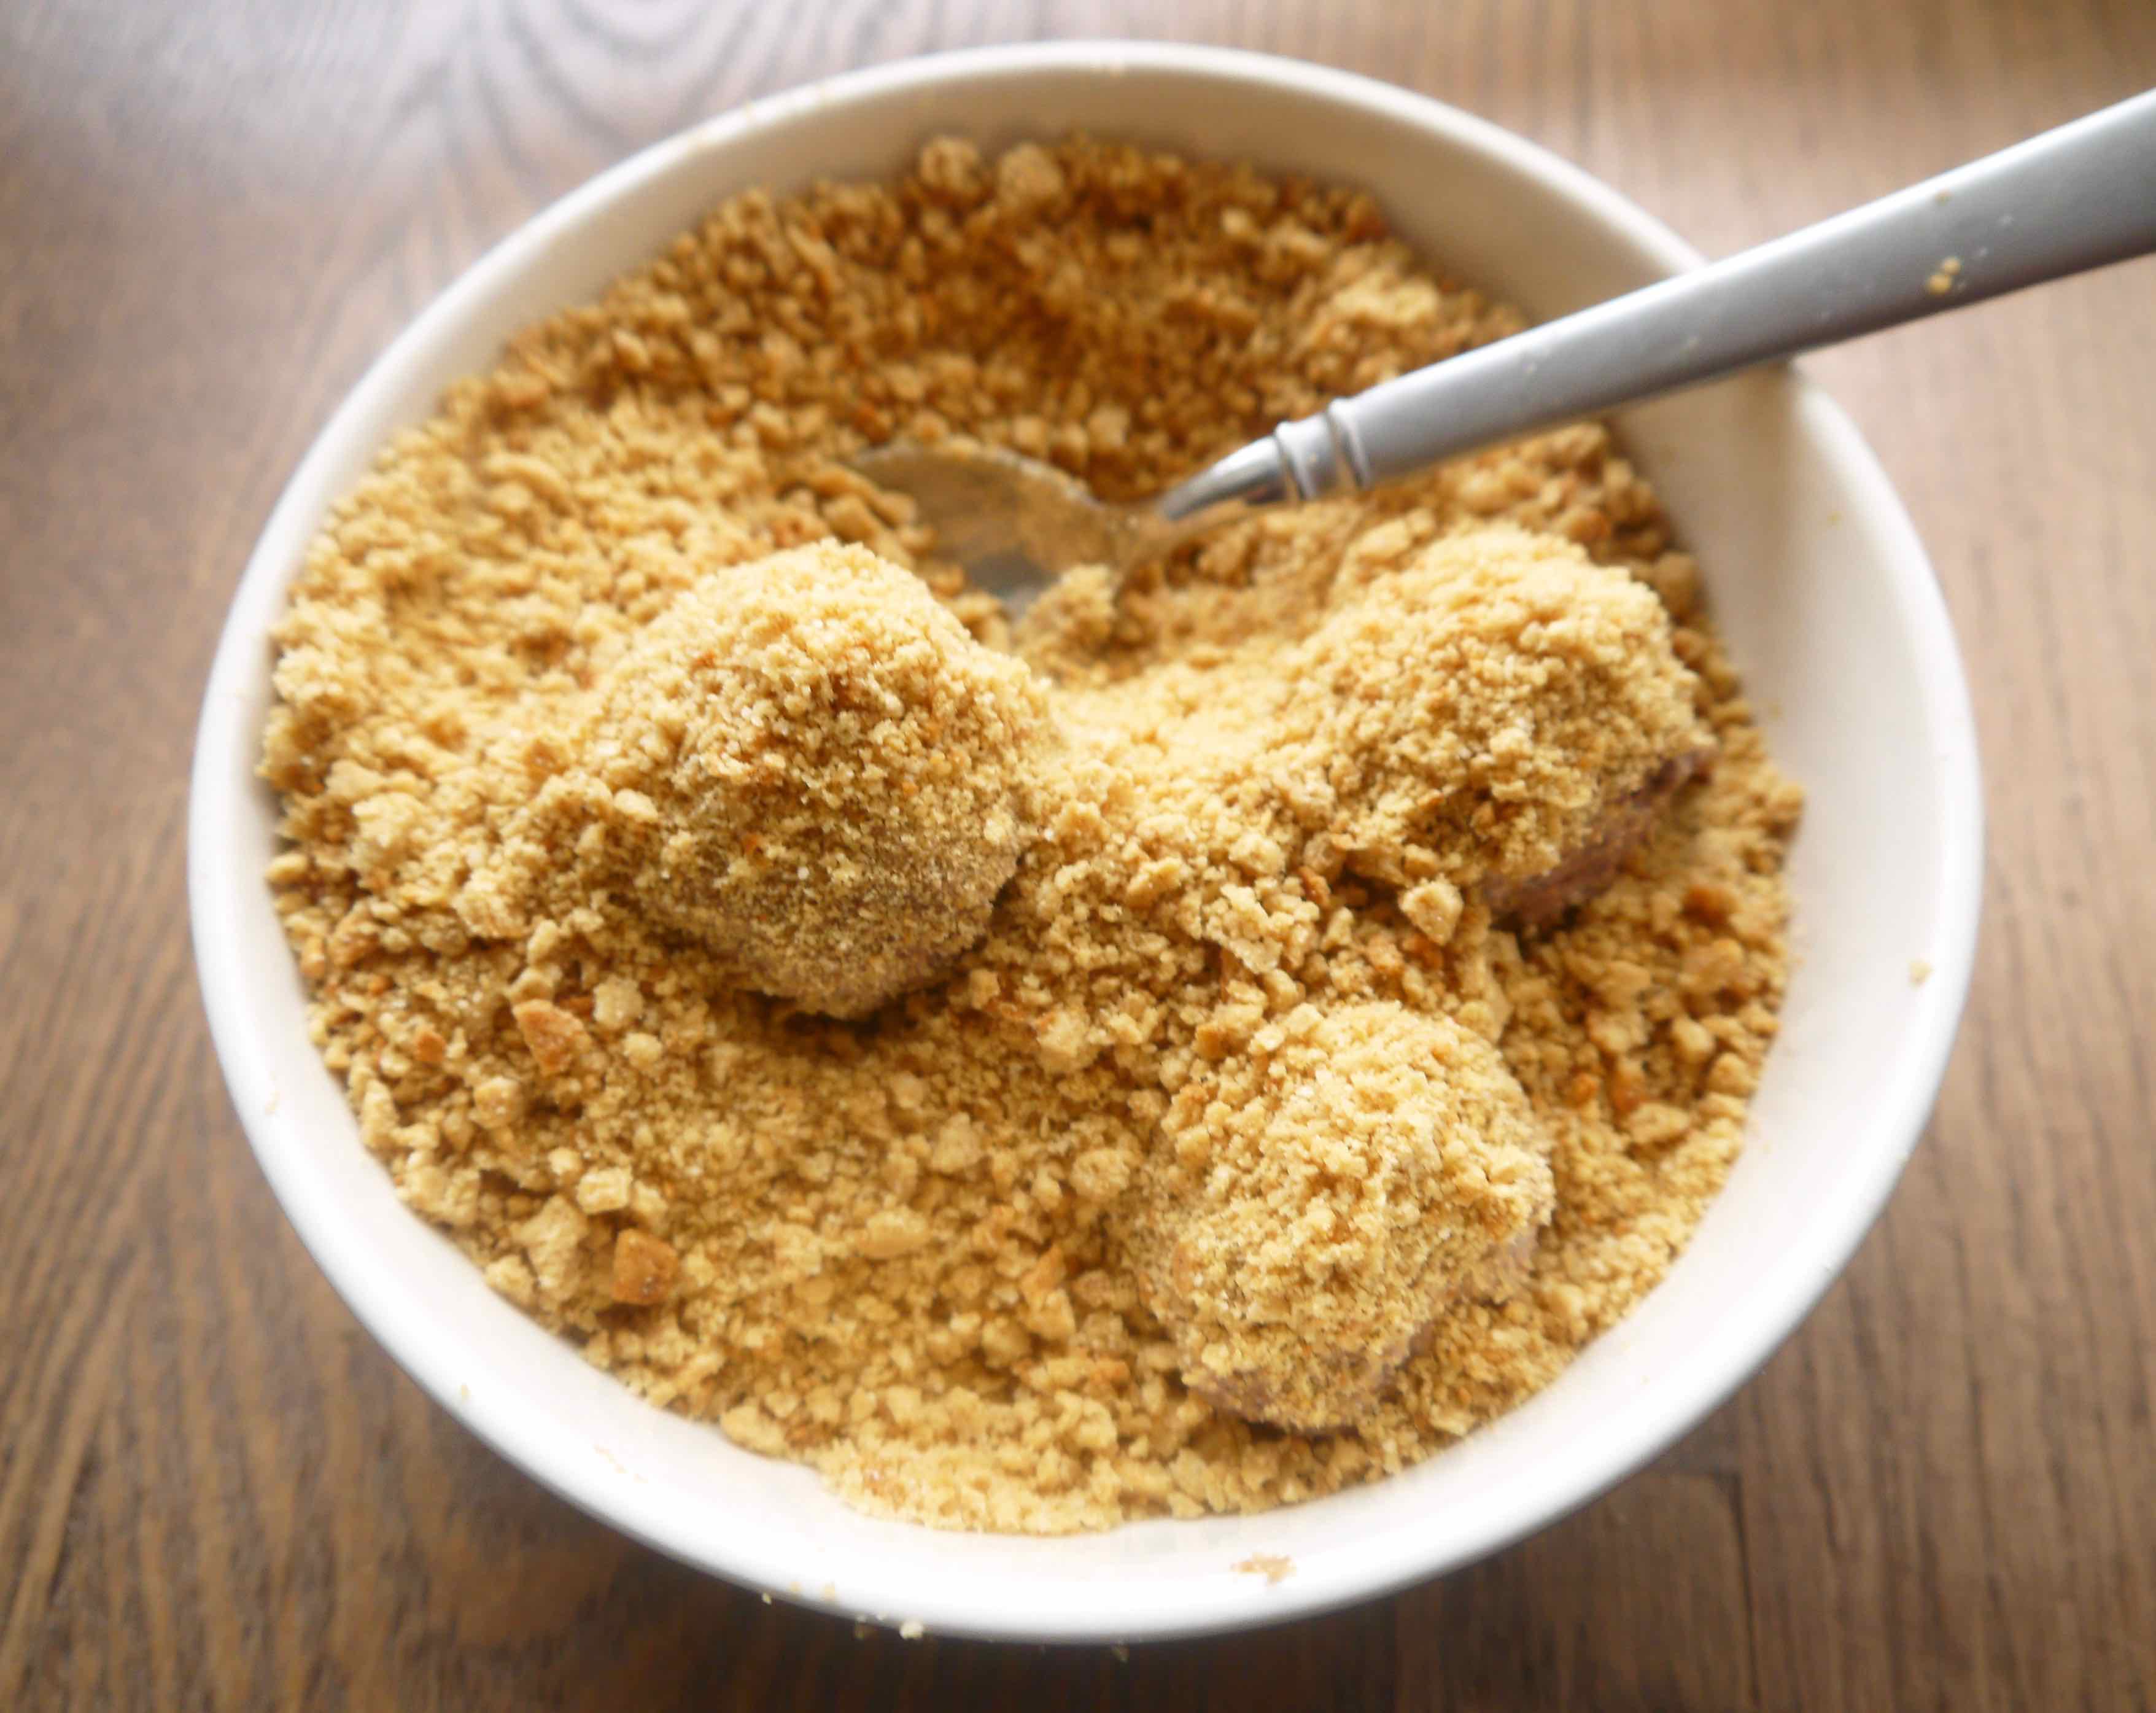 Paleo mousse rolled into a ball and put into cookie crumbs.